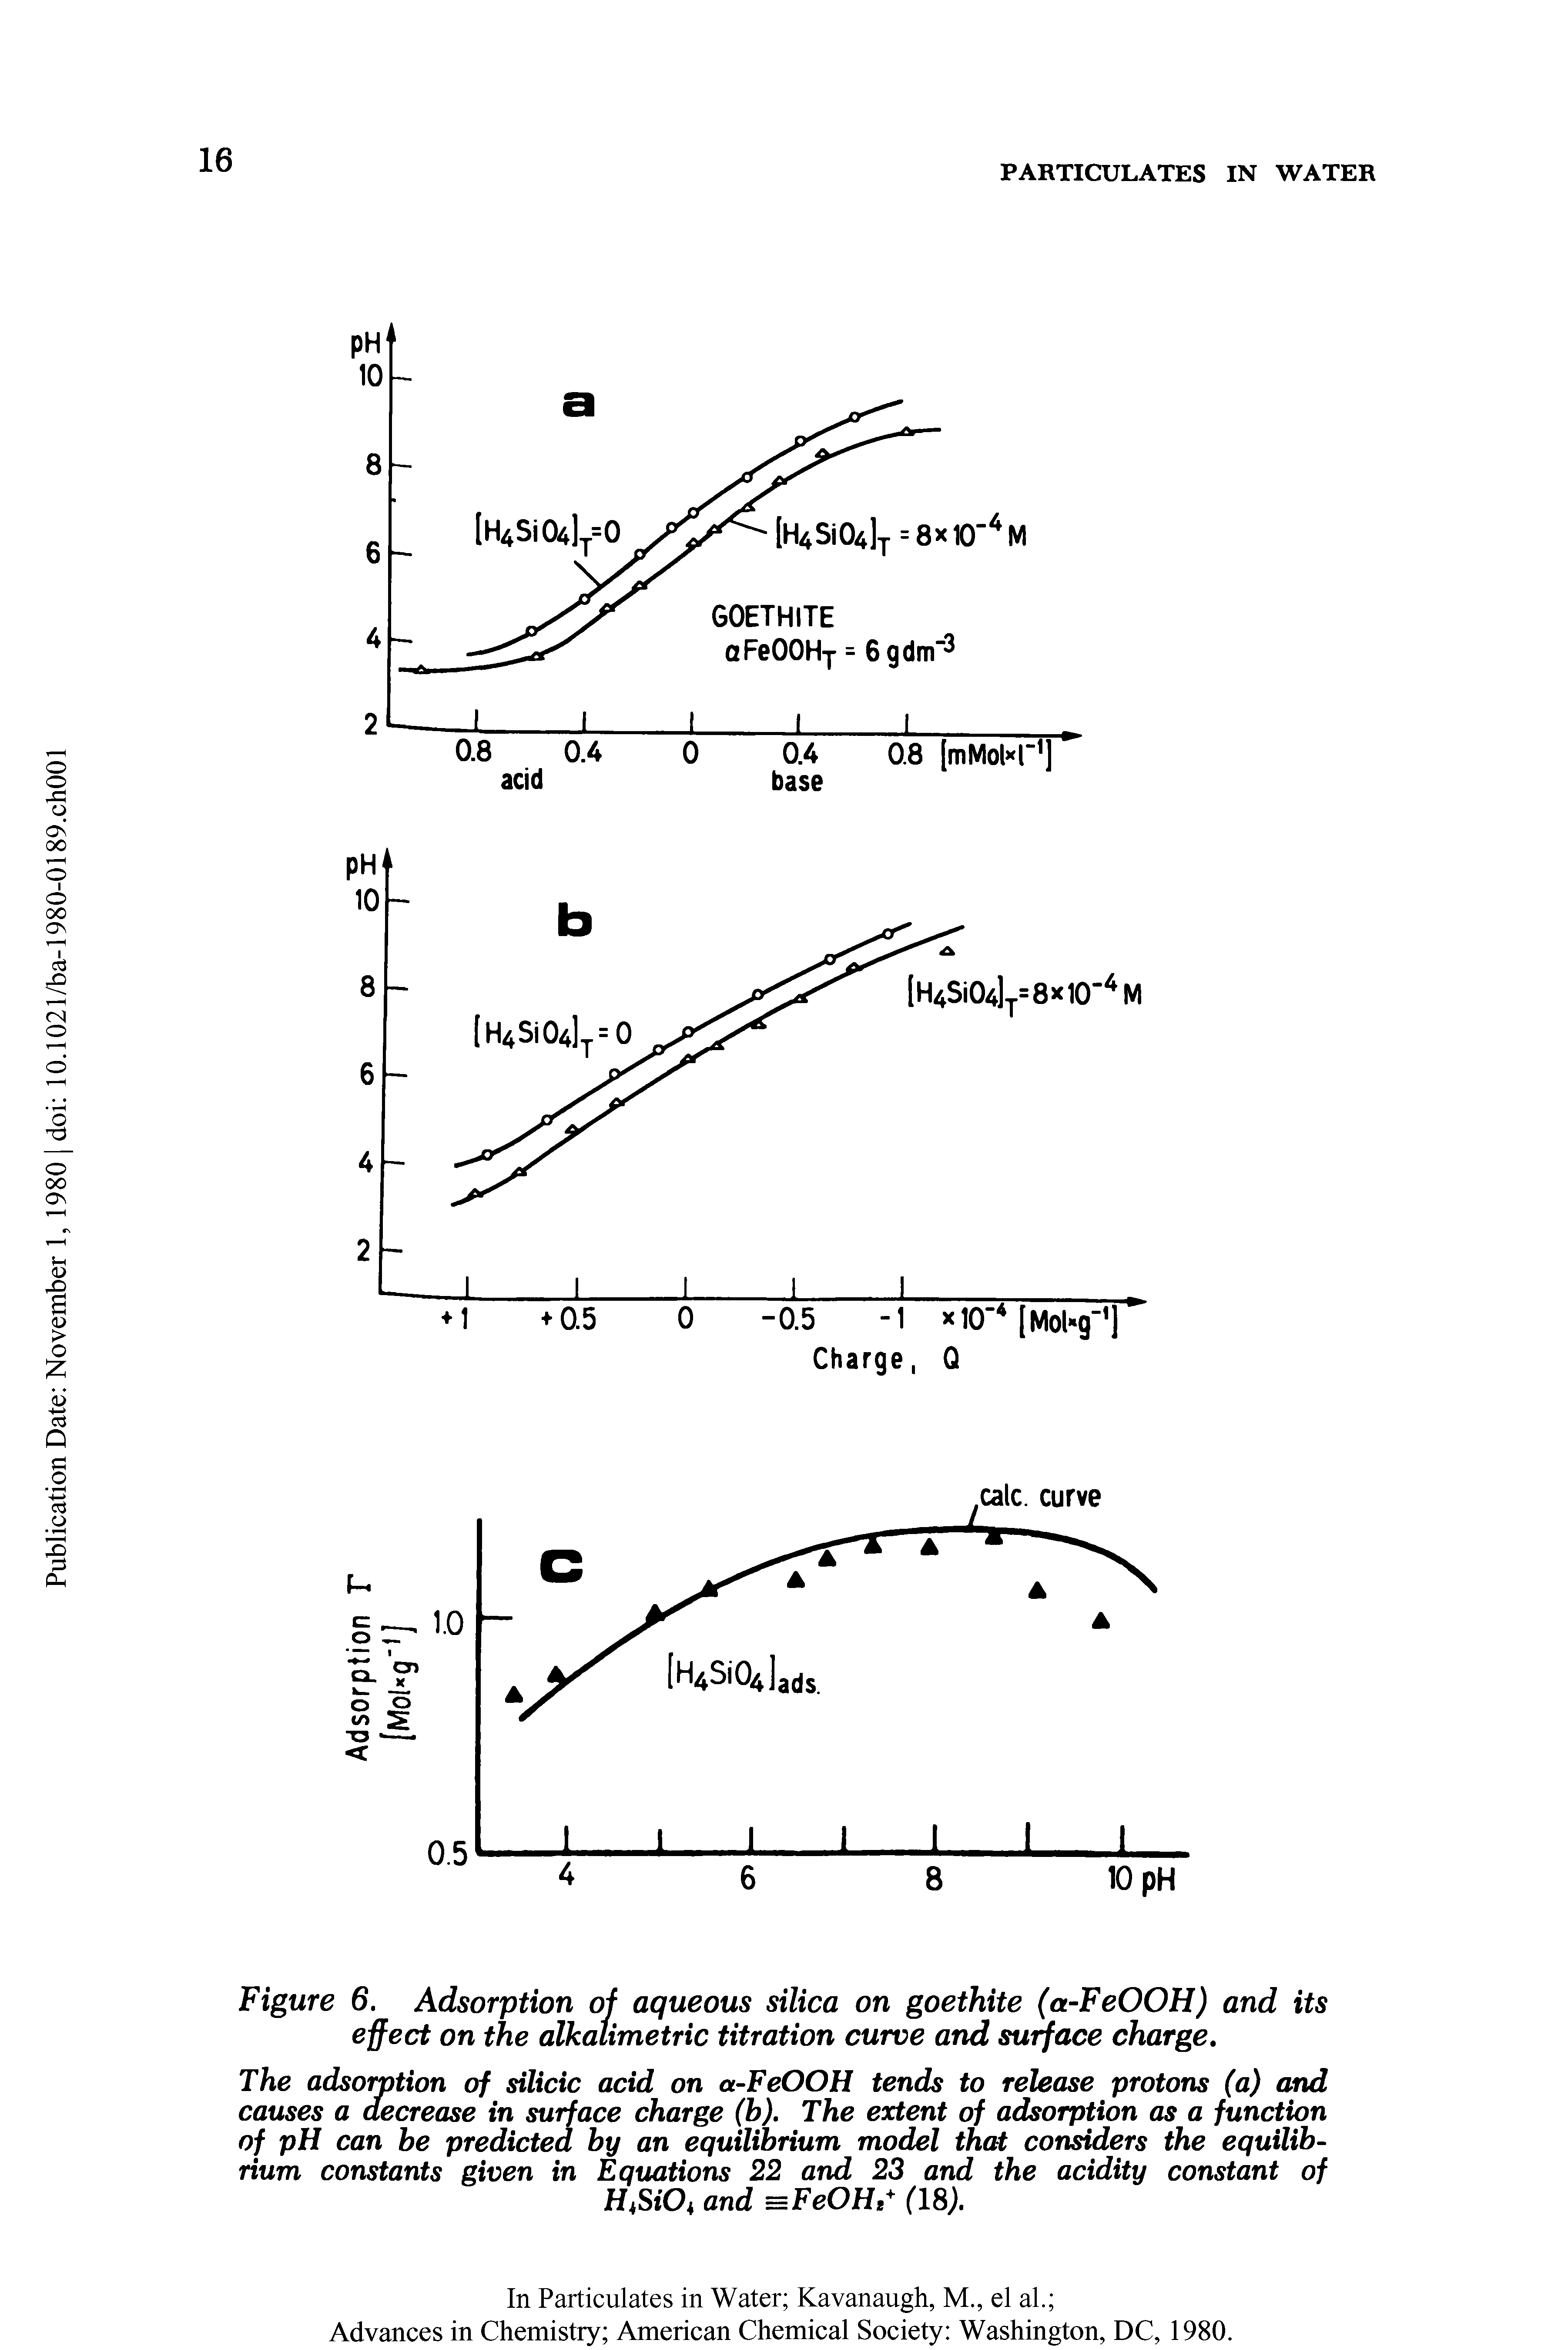 Figure 6. Adsorption of aqueous silica on goethite (a-FeOOH) and its effect on the alkalimetric titration curve and su ace charge.